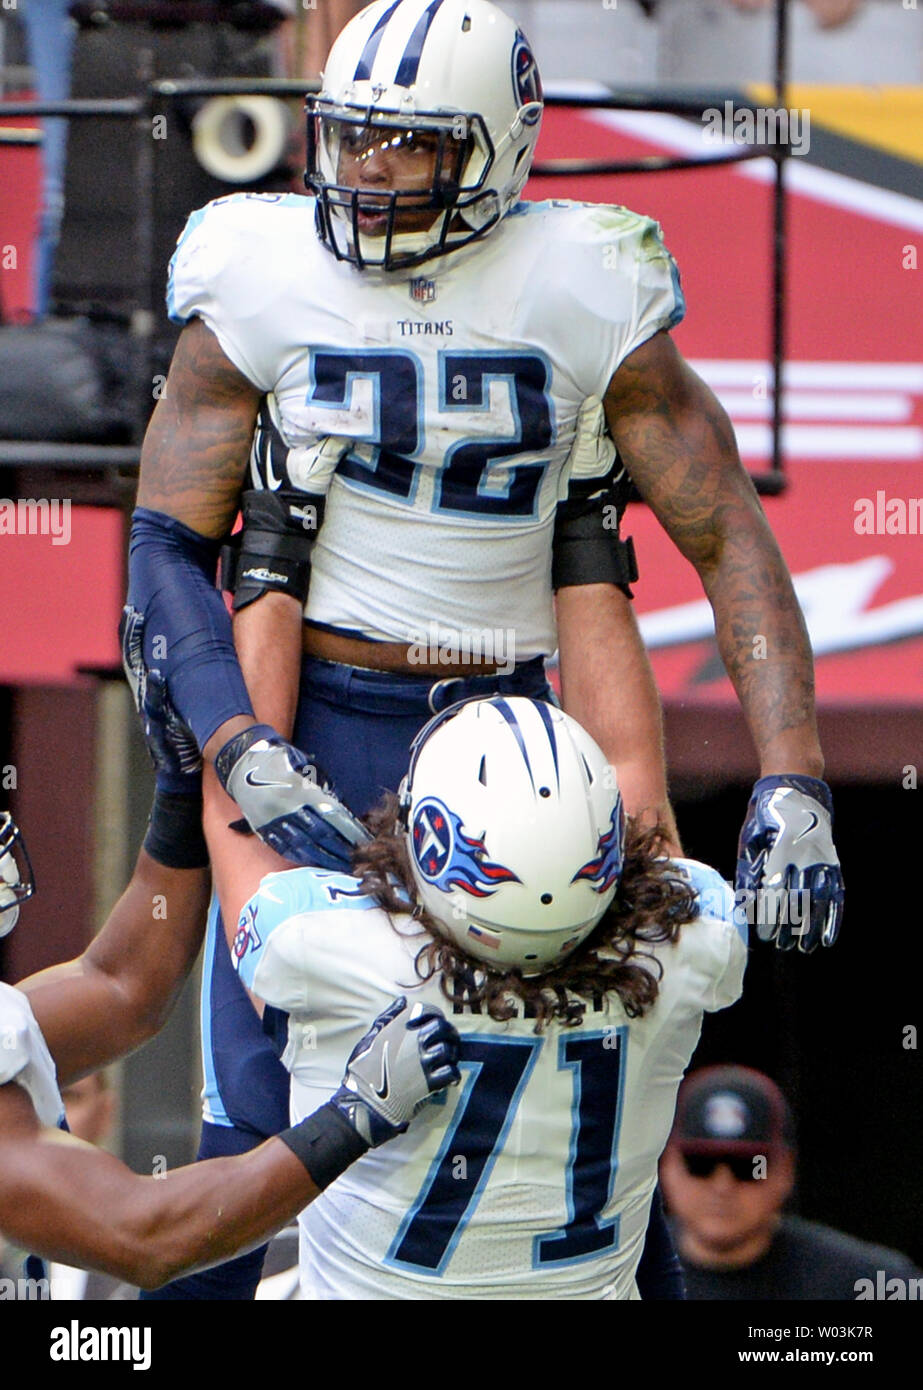 Tennessee Titans' Derrick Henry (22) is lifted up by teammate Dennis Kelly after Henry scored a touchdown in the second quarter against the Arizona Cardinals at University of Phoenix Stadium in Glendale, Arizona December 10, 2017. Photo by Art Foxall/UPI Stock Photo